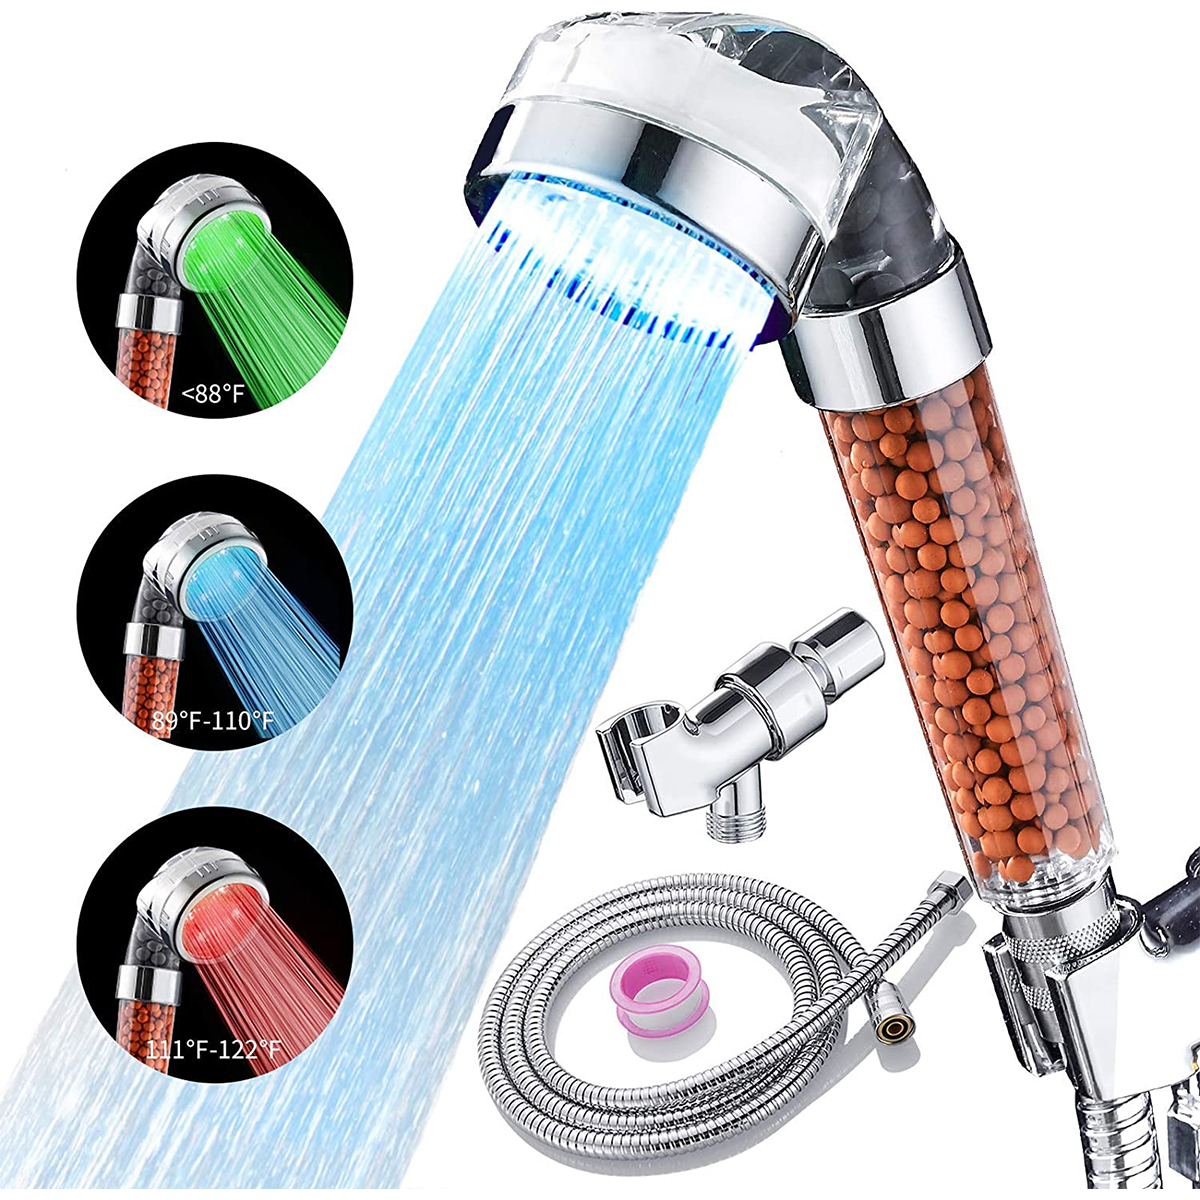 TikTok Loves This Amazon Showerhead Filter— Grab It While It’s On Sale